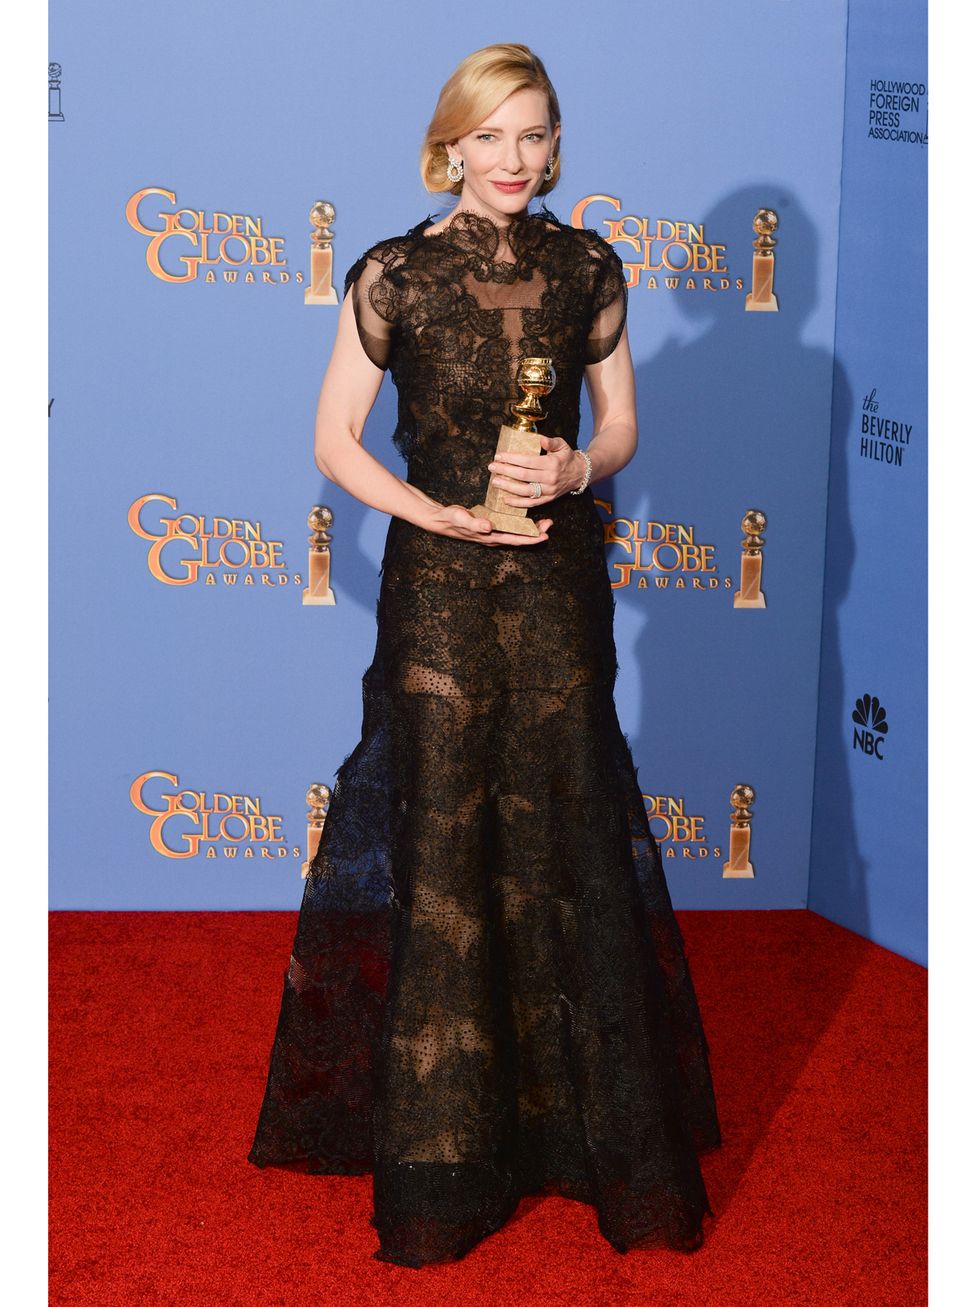 beverly hills, ca   january 12  actress cate blanchett poses in the press room during the 71st annual golden globe awards held at the beverly hilton hotel on january 12, 2014 in beverly hills, california  photo by george pimentelwireimage